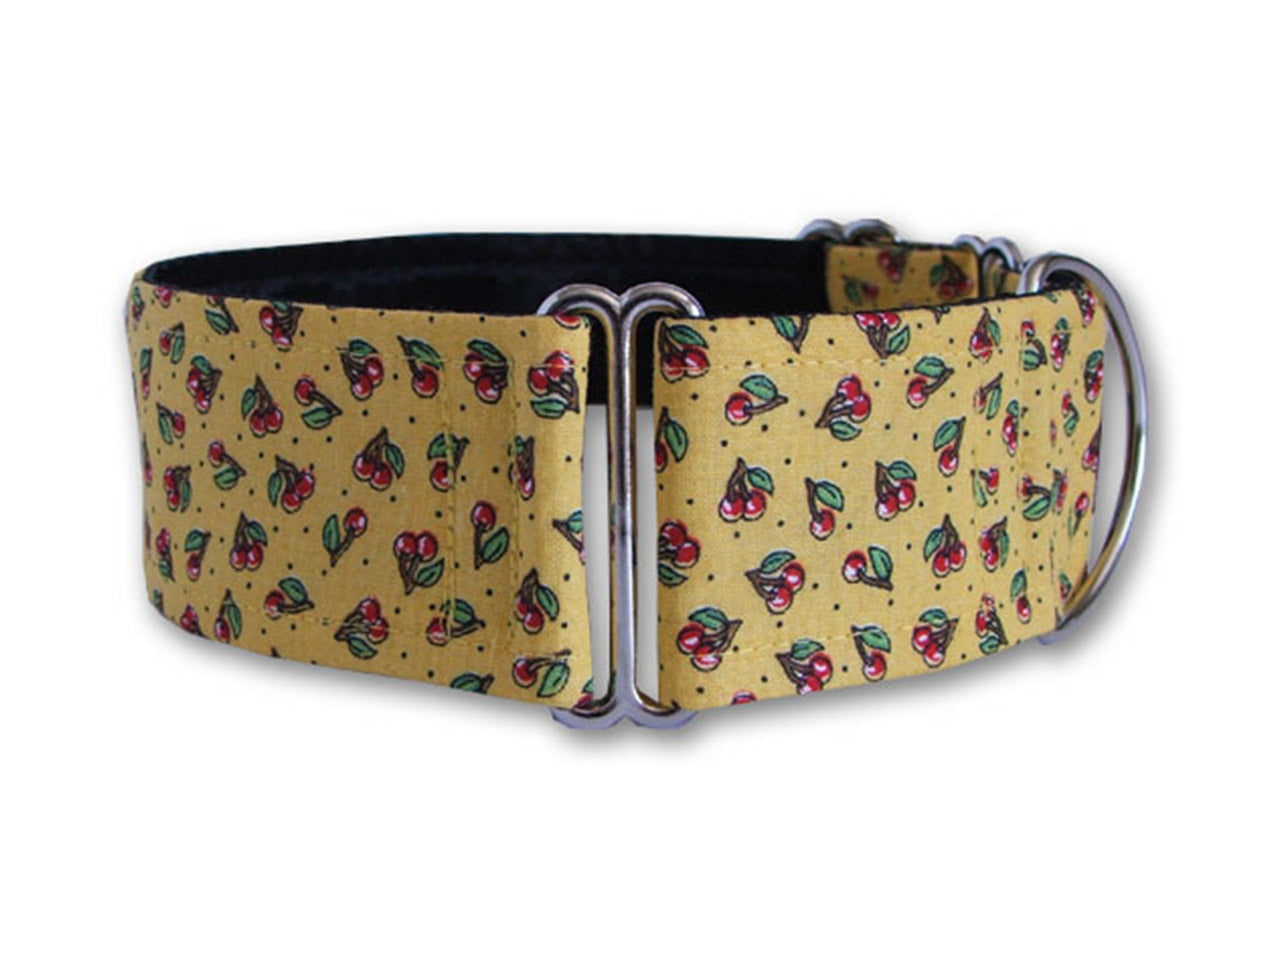 Petite red cherries sweeten up this sunny yellow collar, making a cheerful accessory for any stylish pup!